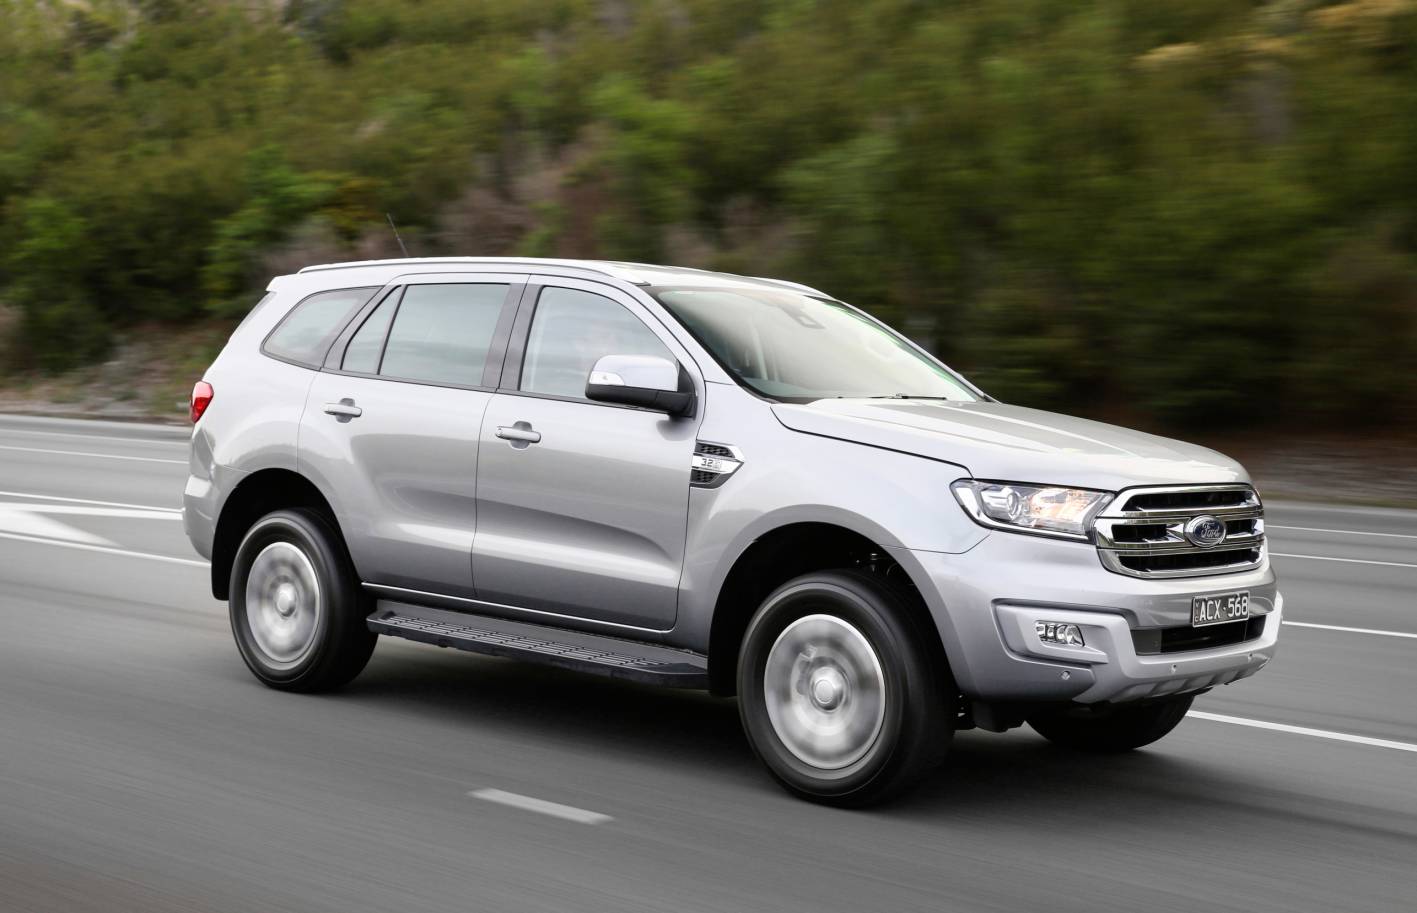 2017 Ford Everest gets new RWD variant, priced from $55,990